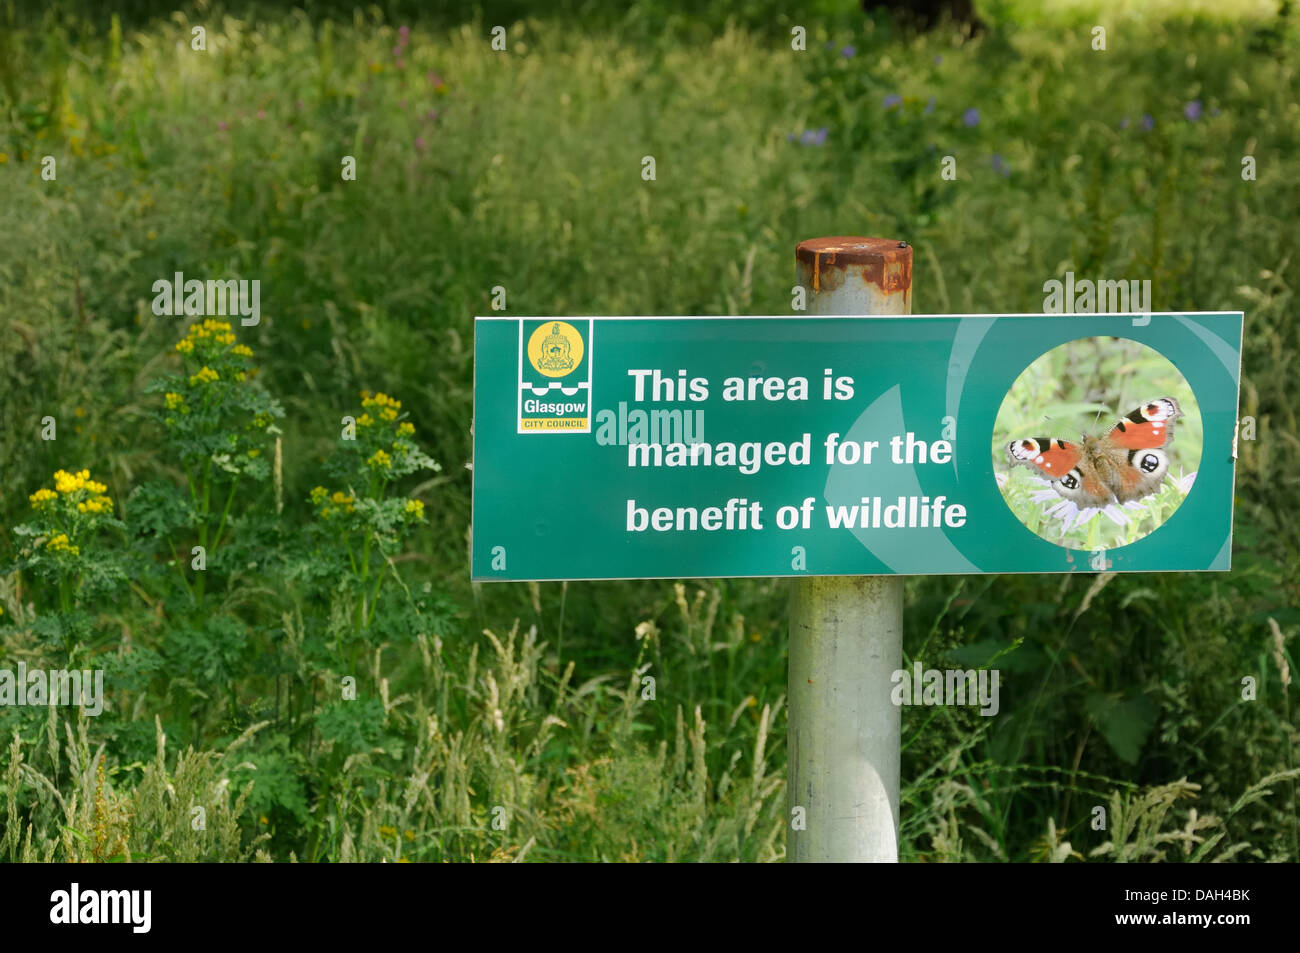 Wildlife conservation area managed by Glasgow city council. Stock Photo